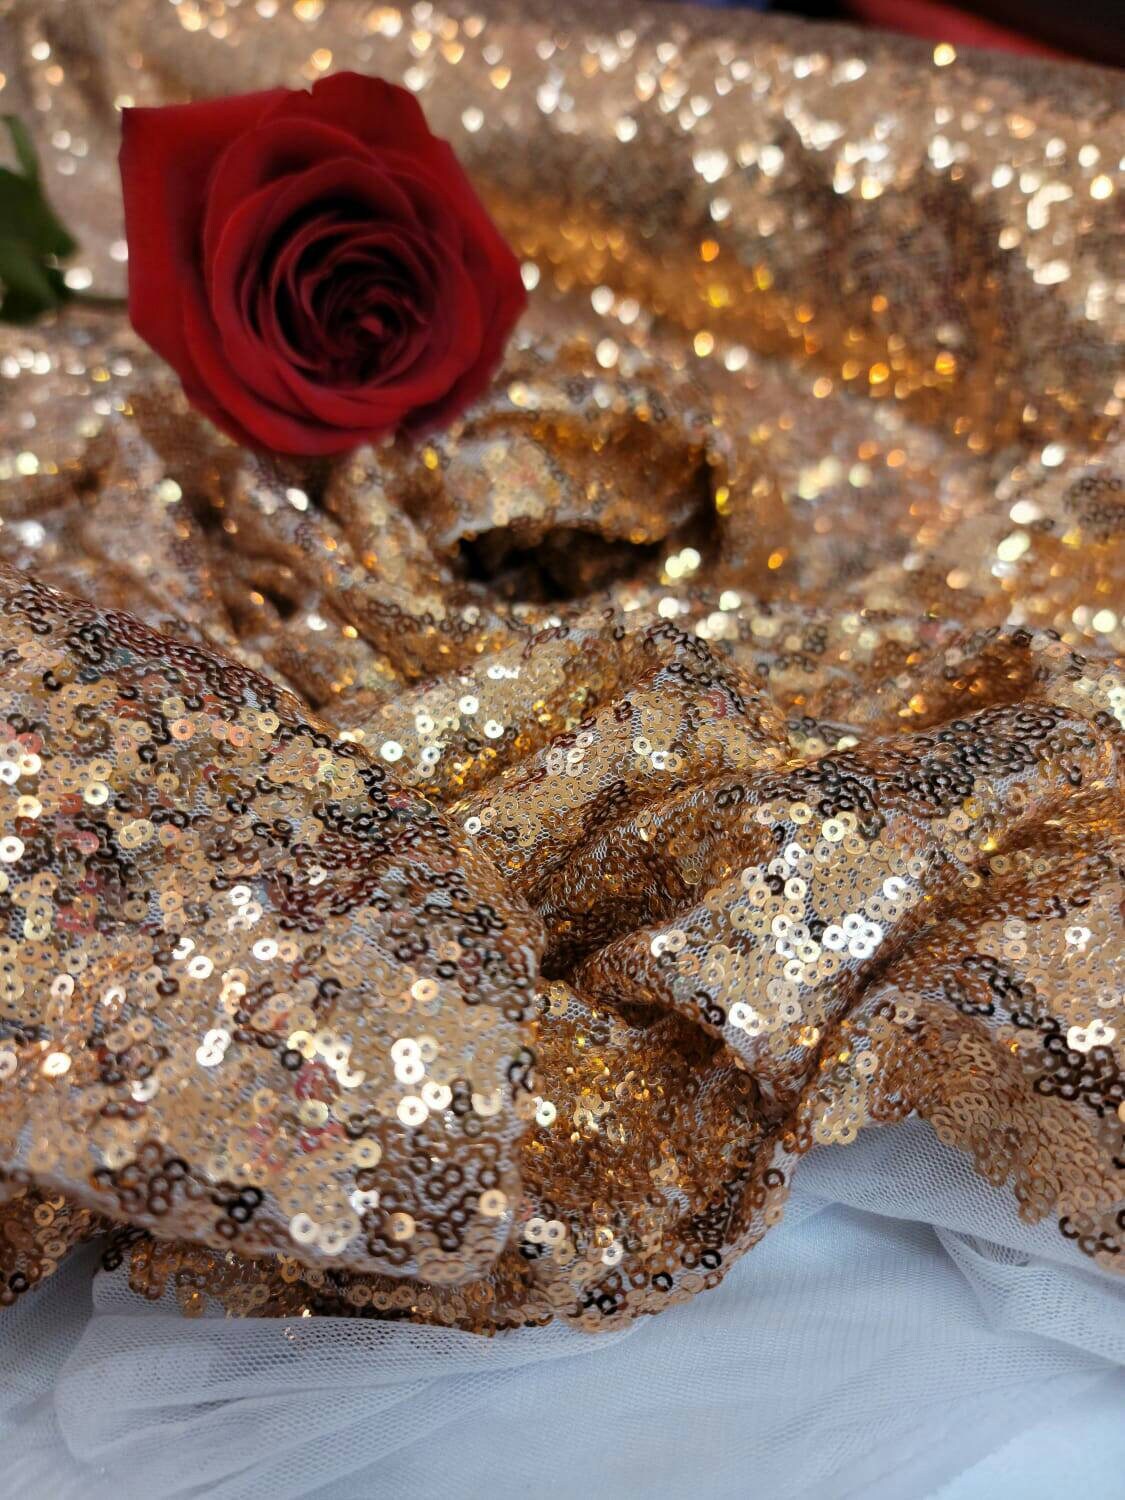 Sequin Fabric By The Yard Glitz Cooper Sequin Fabric Sequin Embroidery On Mesh Draping Clothing Decoration Background